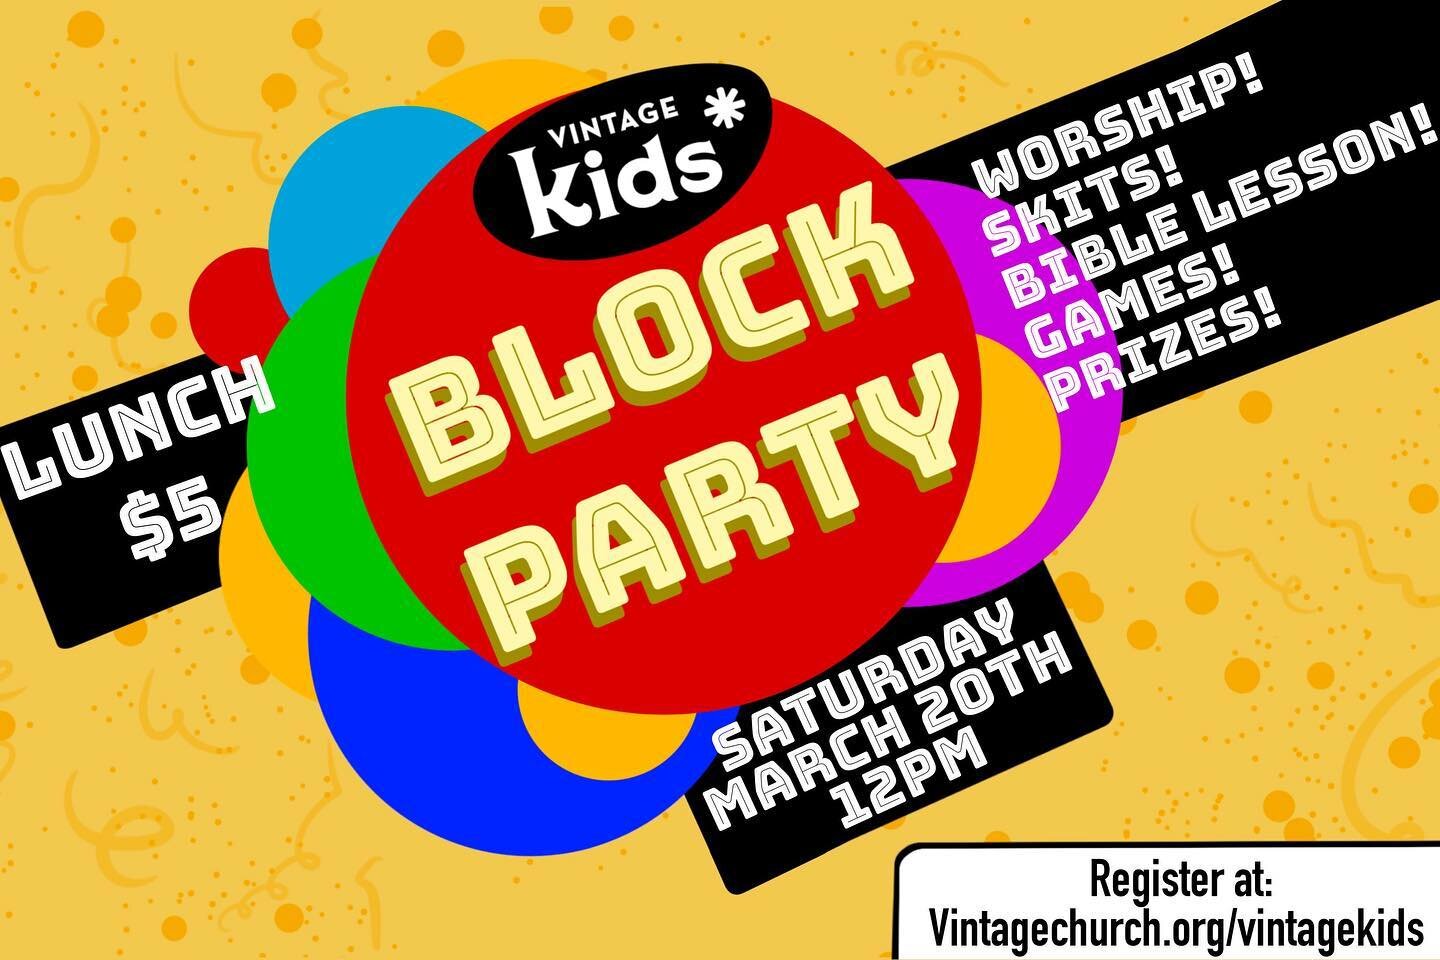 Did you hear we are having a block party?! Come join us on Saturday March 20th in our parking lot for worship, games, skits, prizes, and more! Bring your own lunch or buy lunch from us for $5! Register on our website! Link in bio!